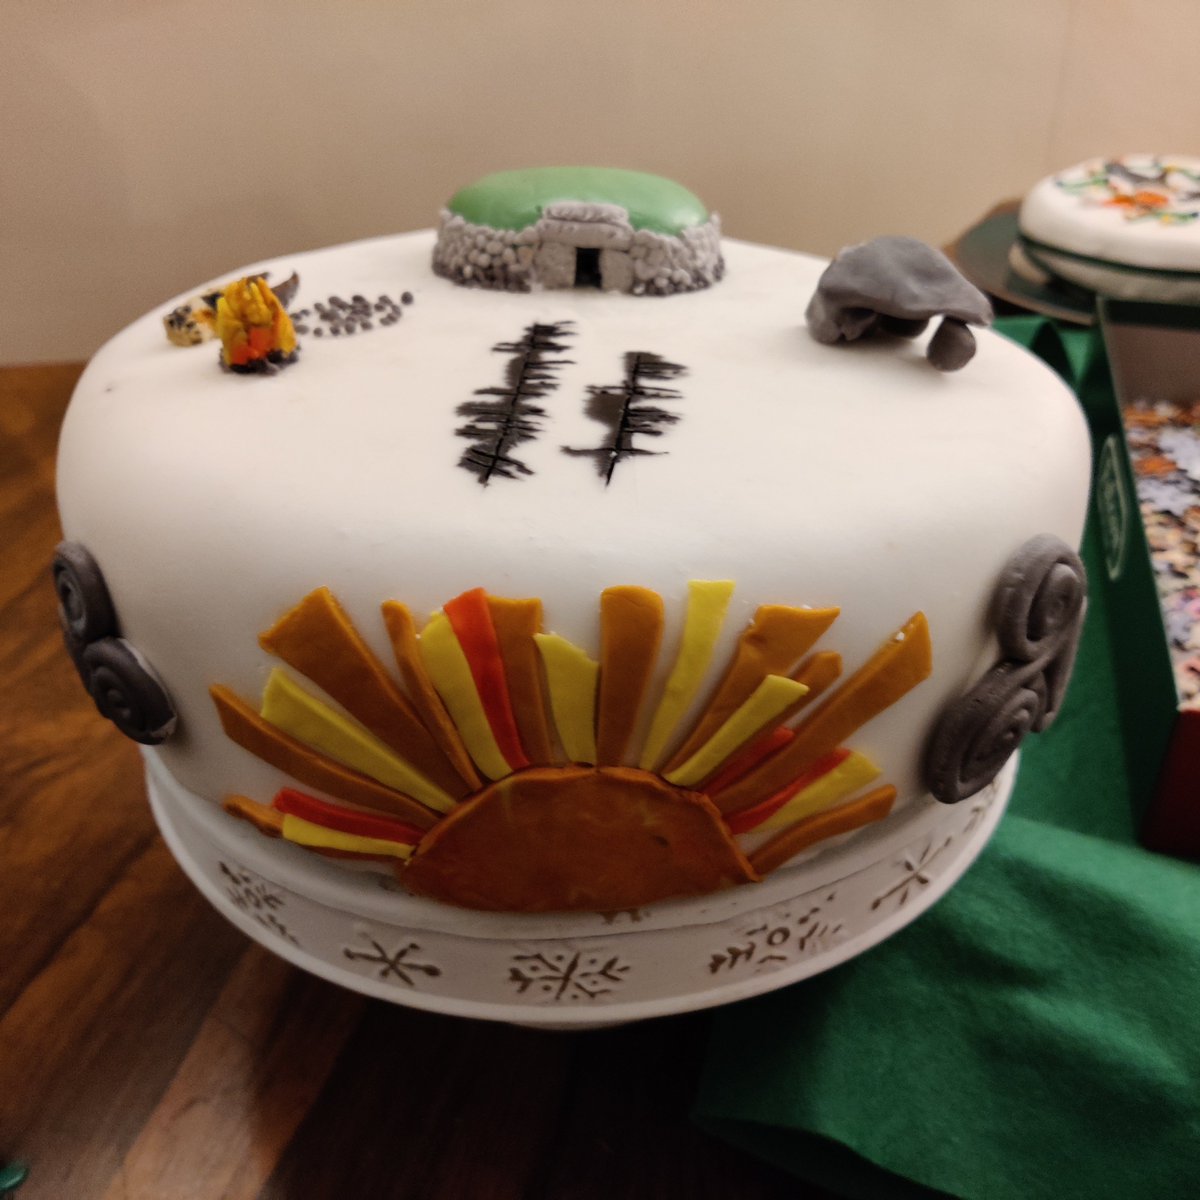 Following a visit to Newgrange on 23rd of December, Sharon, Deirdre, Sophie and Laoise were inspired to decorate their Christmas cake with a Newgrange solstice theme. We think it's fantastic.... and thanks for sharing the photo girls! #ChristmasCake #newgrange #WinterSolstice